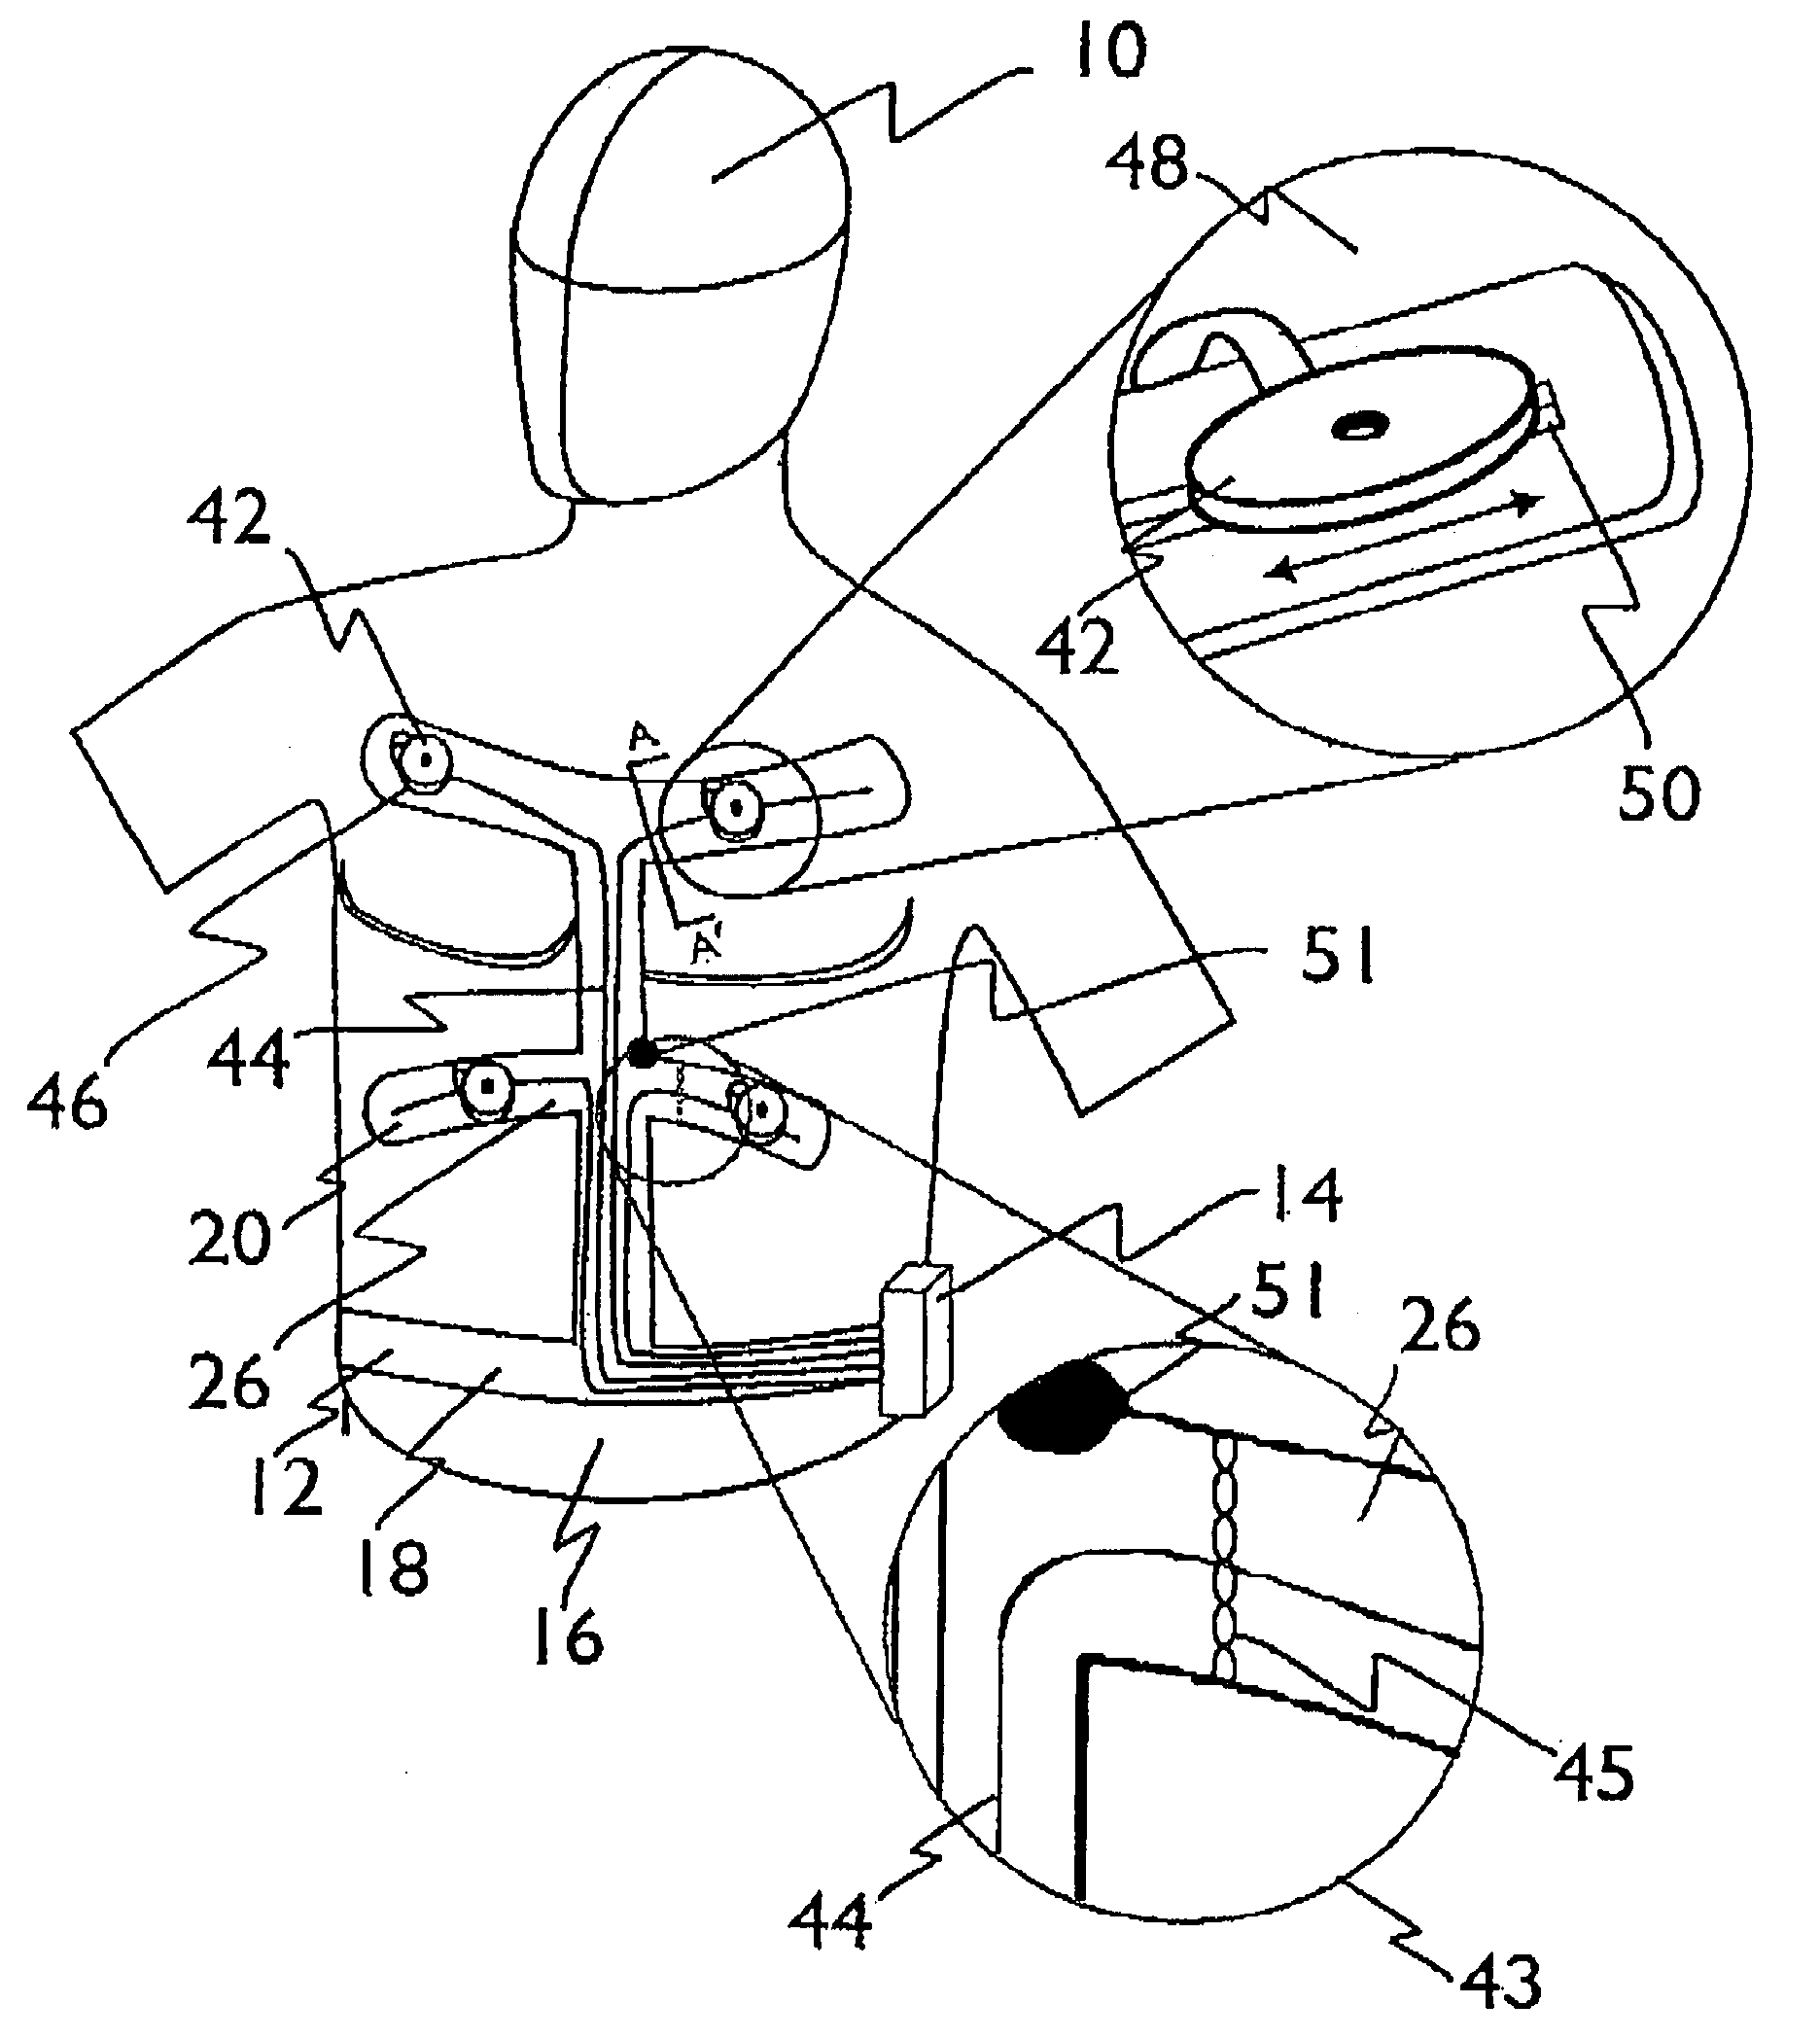 Electrode harness and method of taking biopotential measurements